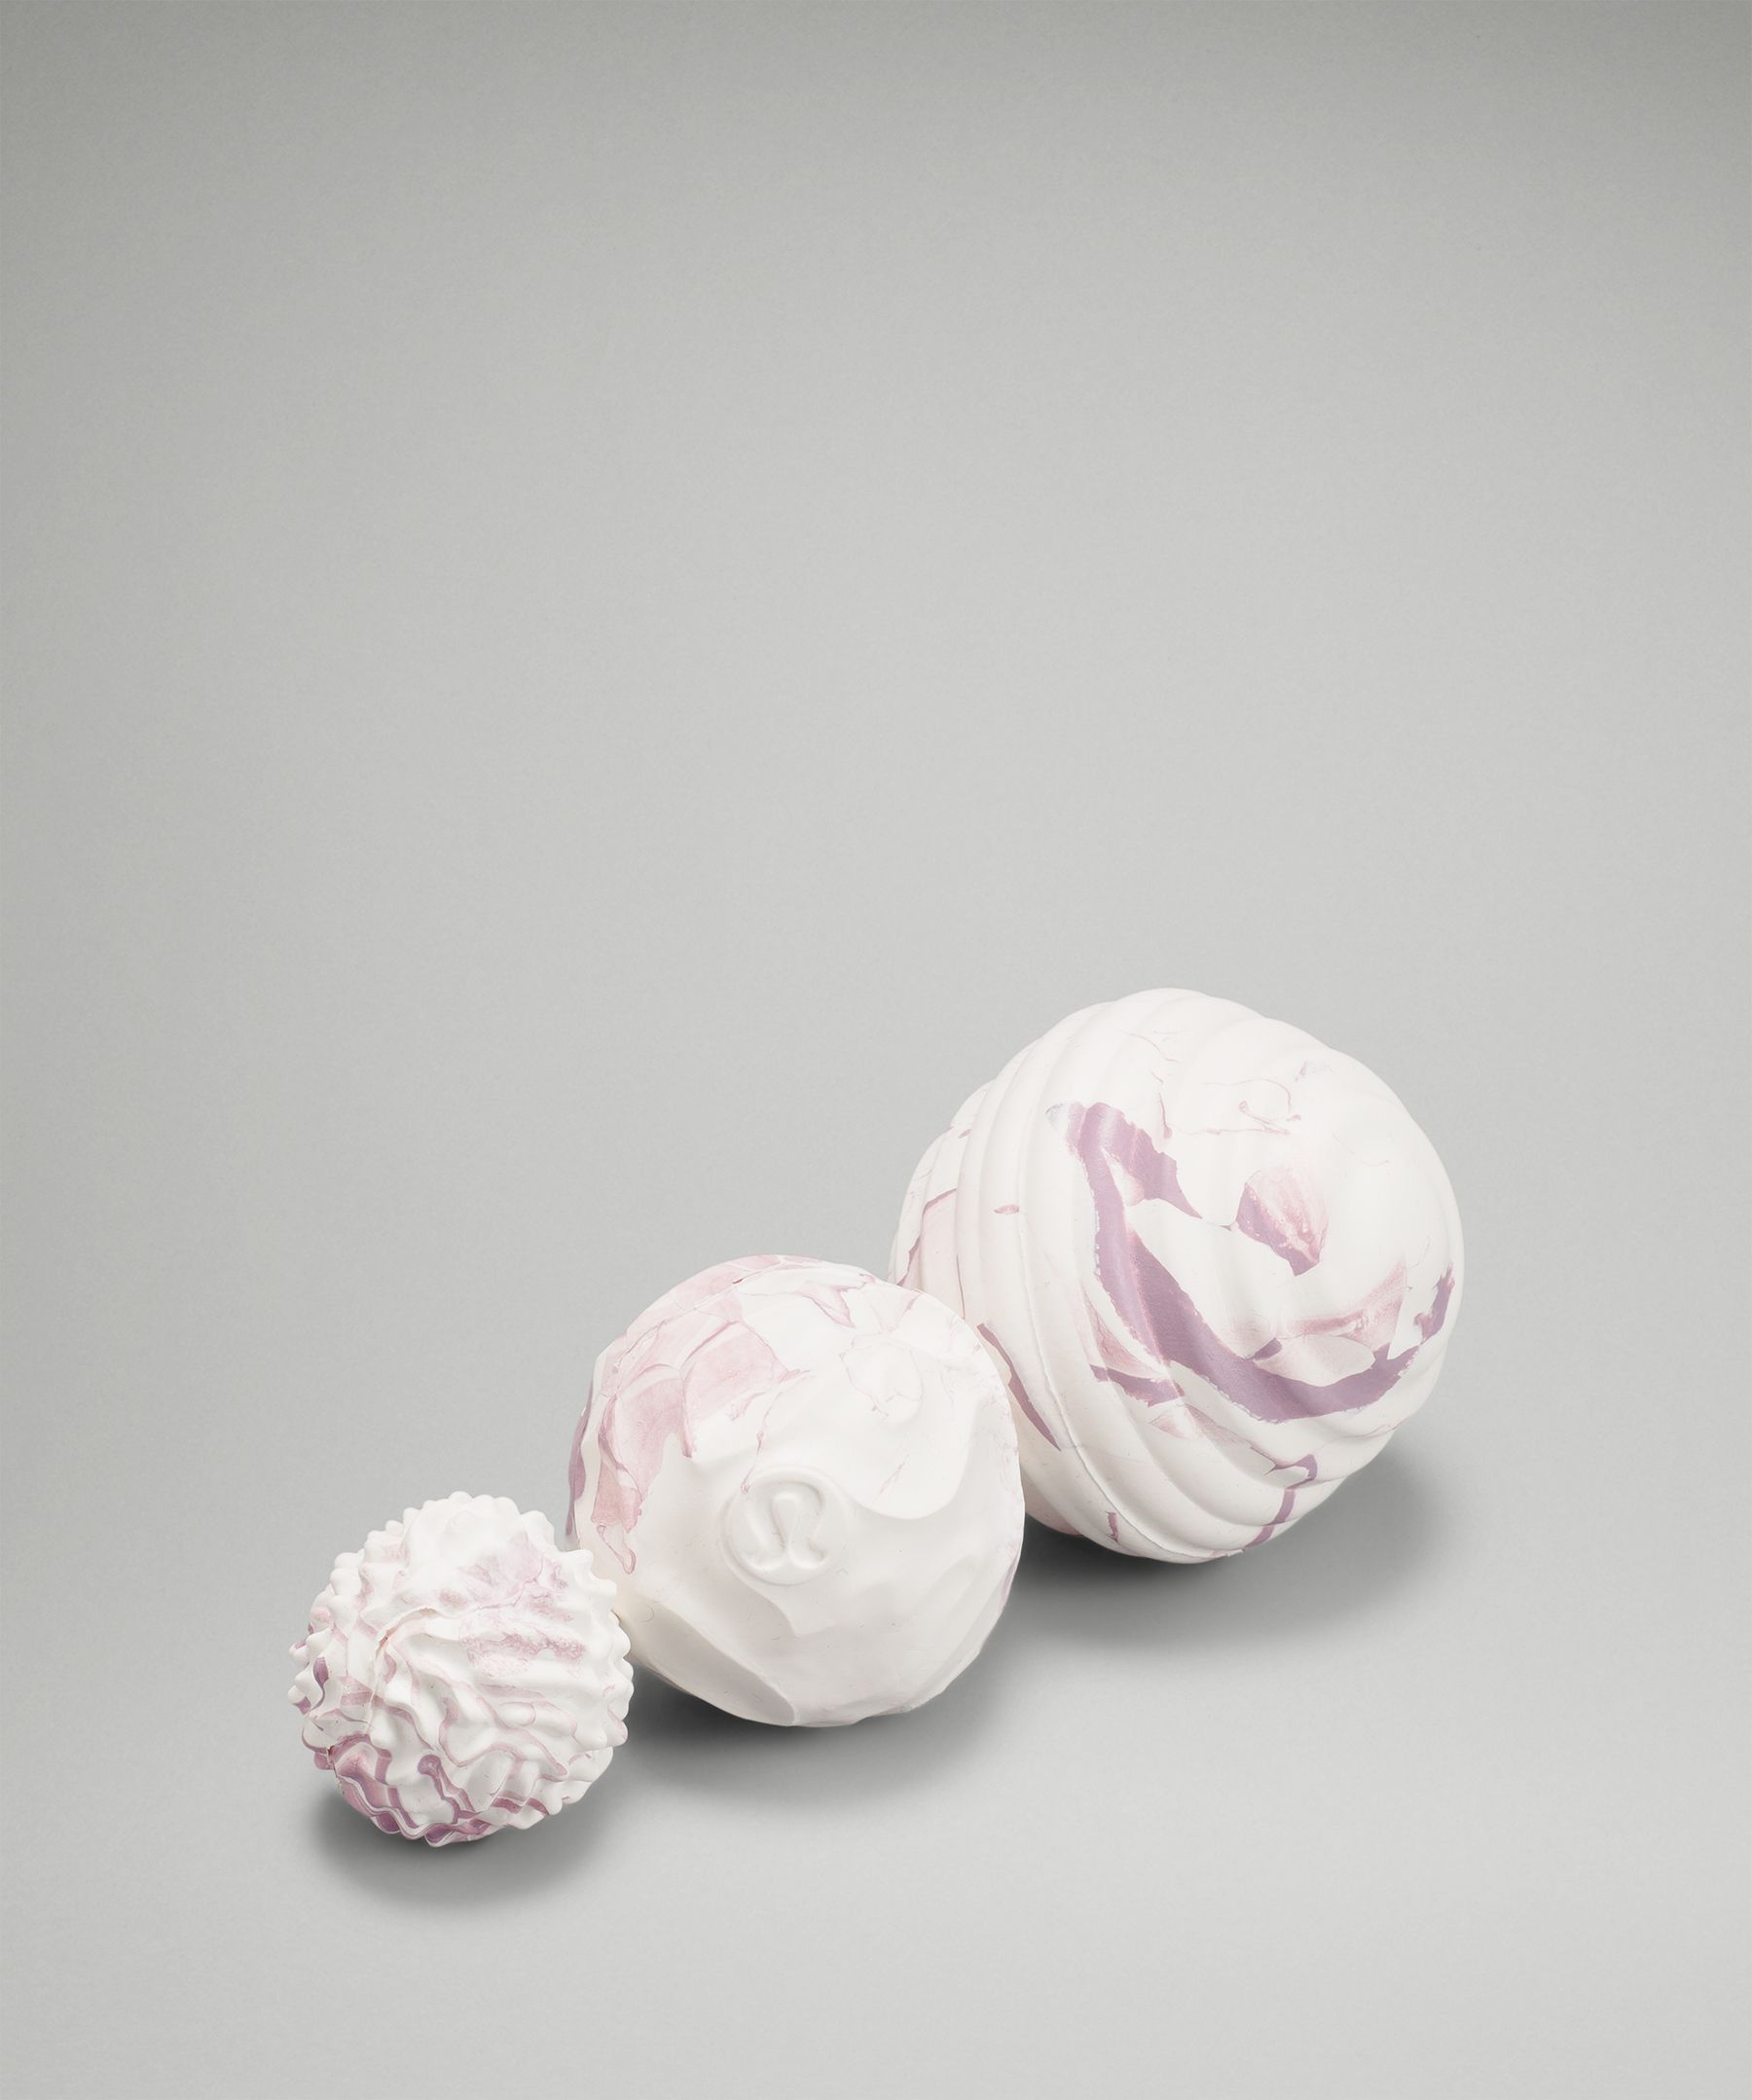 Lululemon Release And Recover Ball Set In Dusty Rose/white